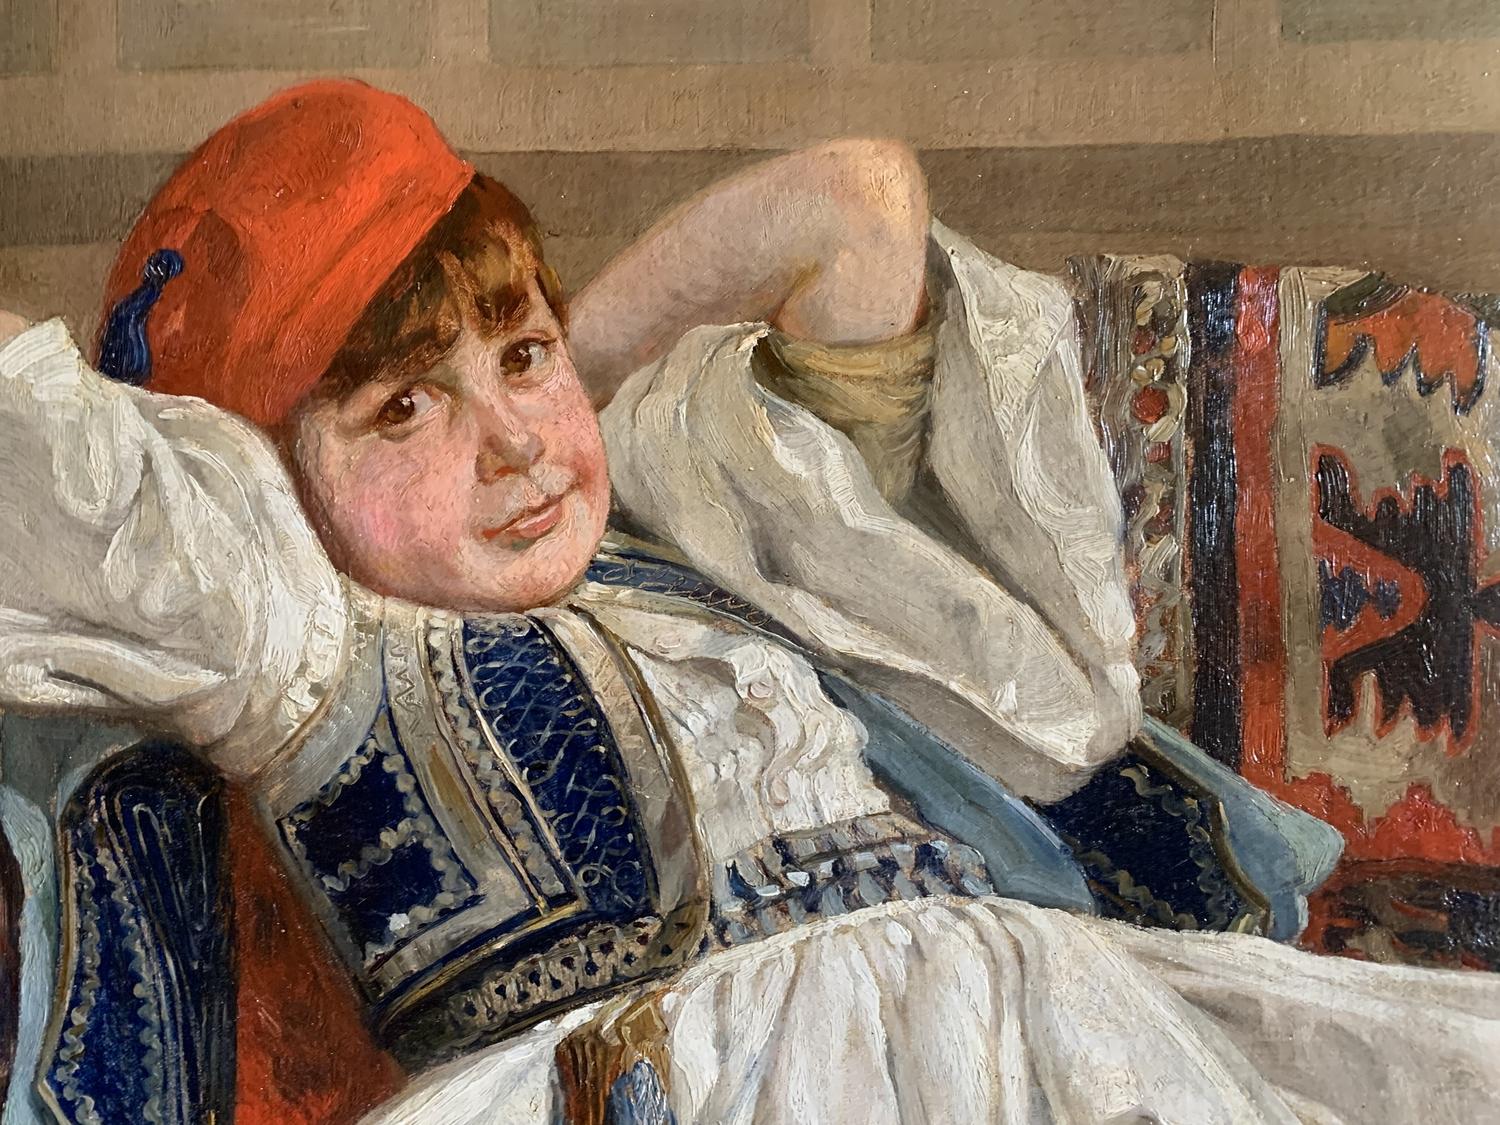 Young boy dressed as an Evzone (elite light infantry battalion of the Greek army, currently assigned to guard the presidential palace in Athens), lying on a sofa, a hookah at his feet. He is dressed in the traditional skirt, the fustanelle, wearing